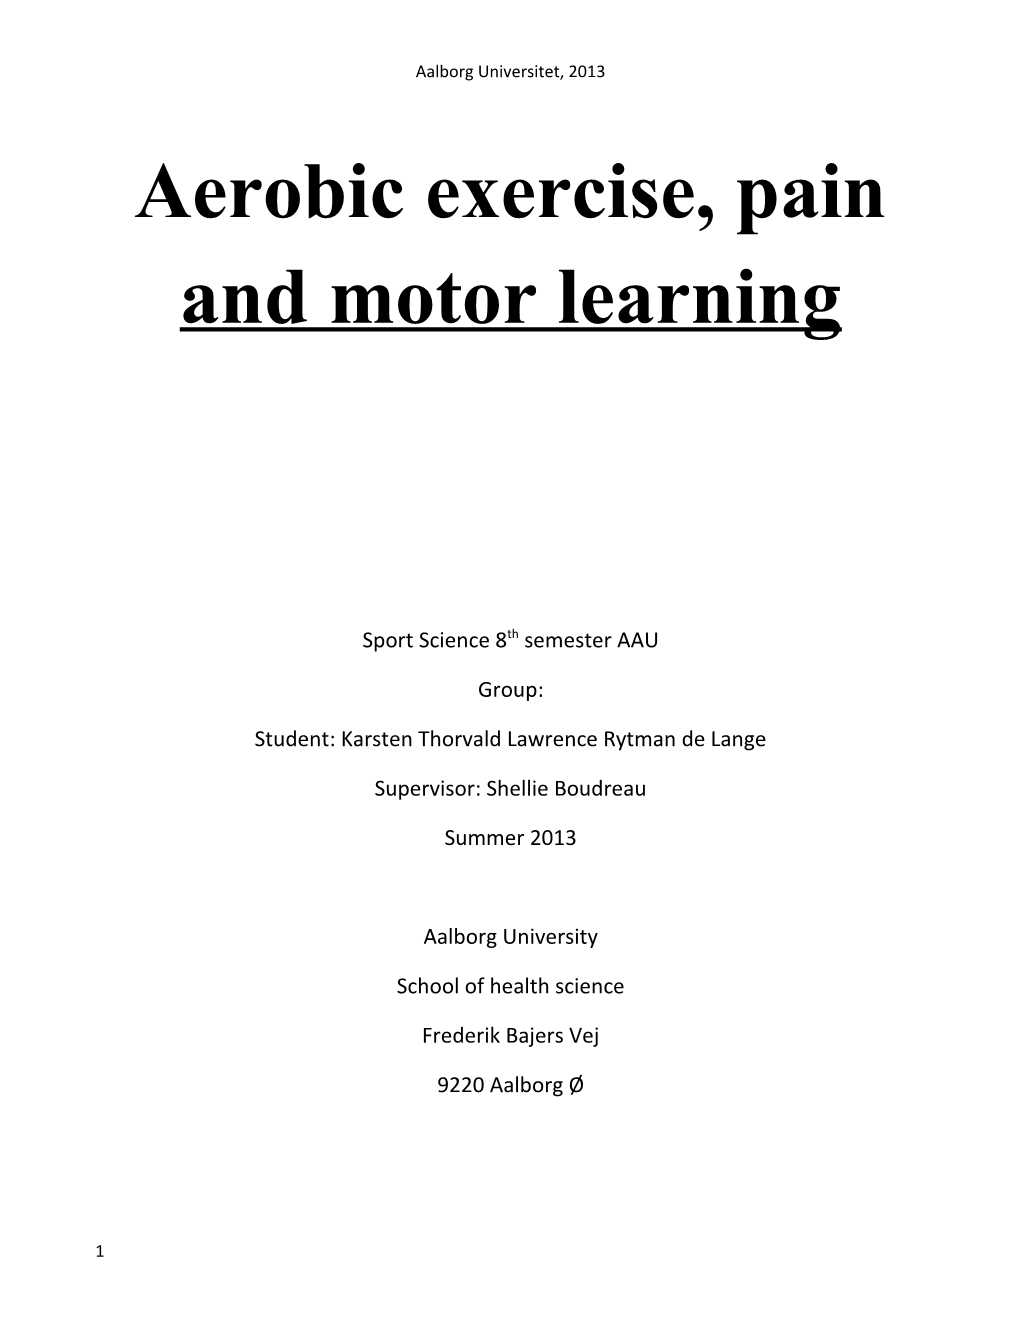 Aerobic Exercise, Pain and Motor Learning